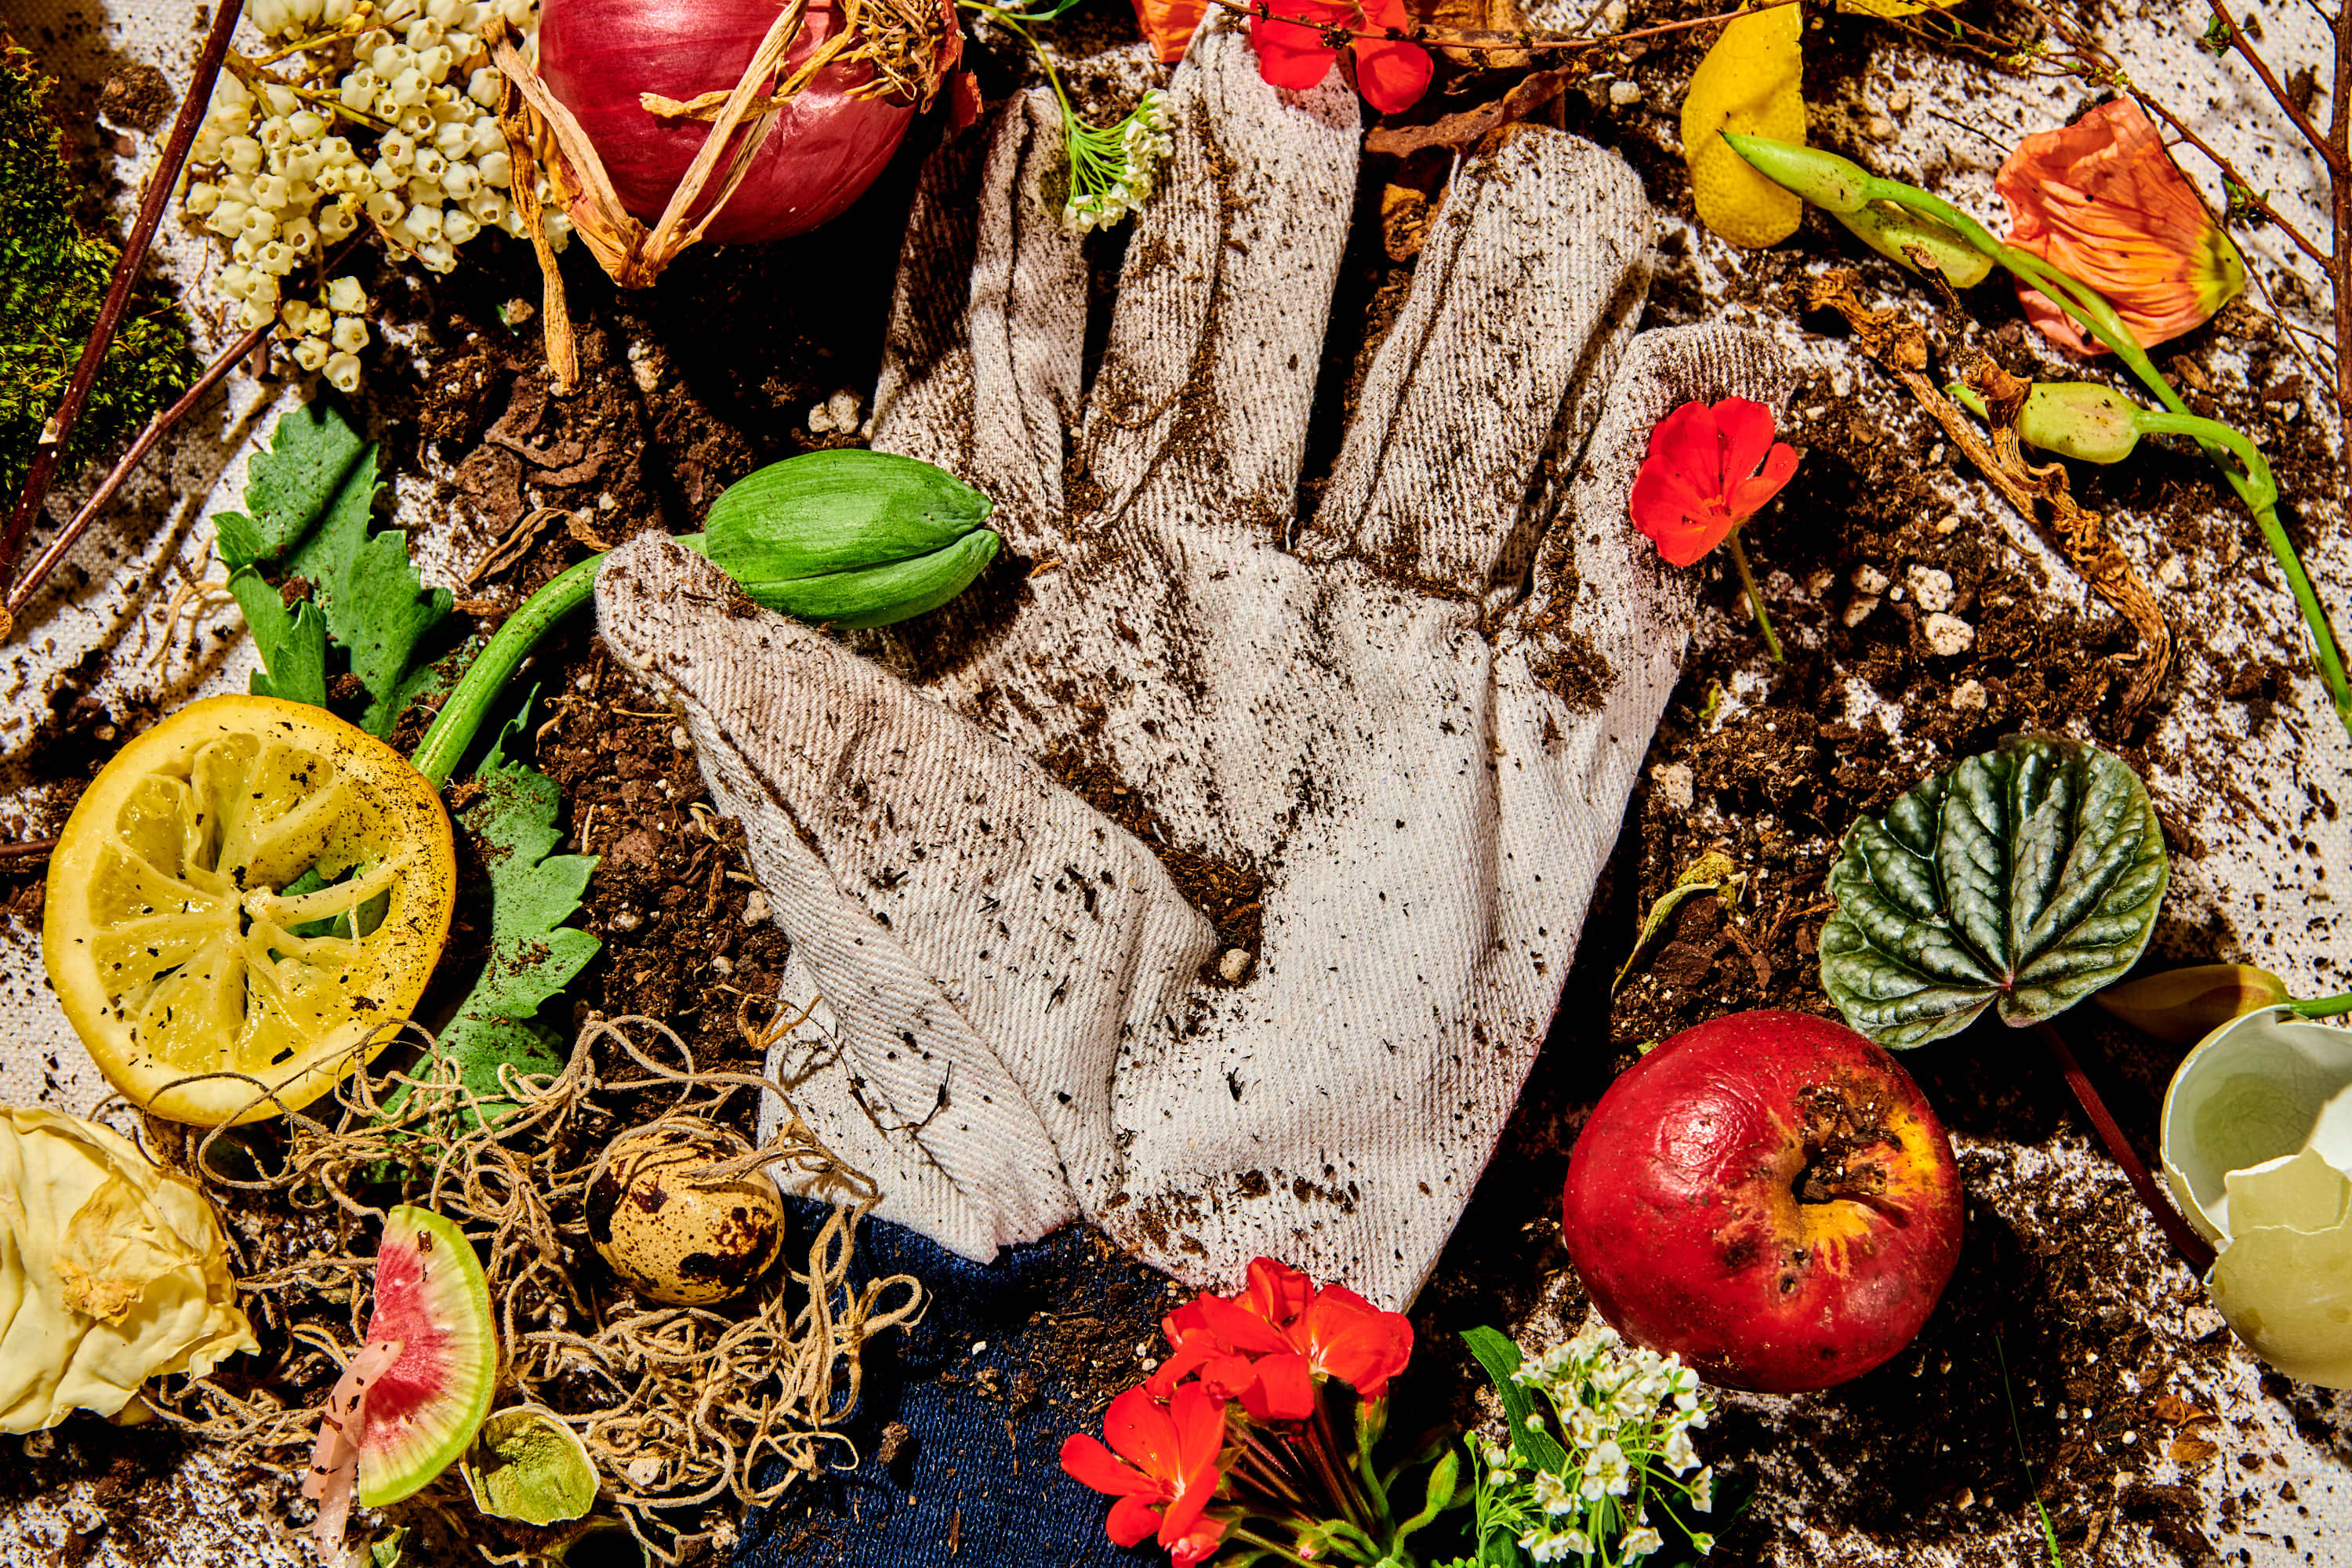 How To Compost At Home FAQ - Honestly Modern